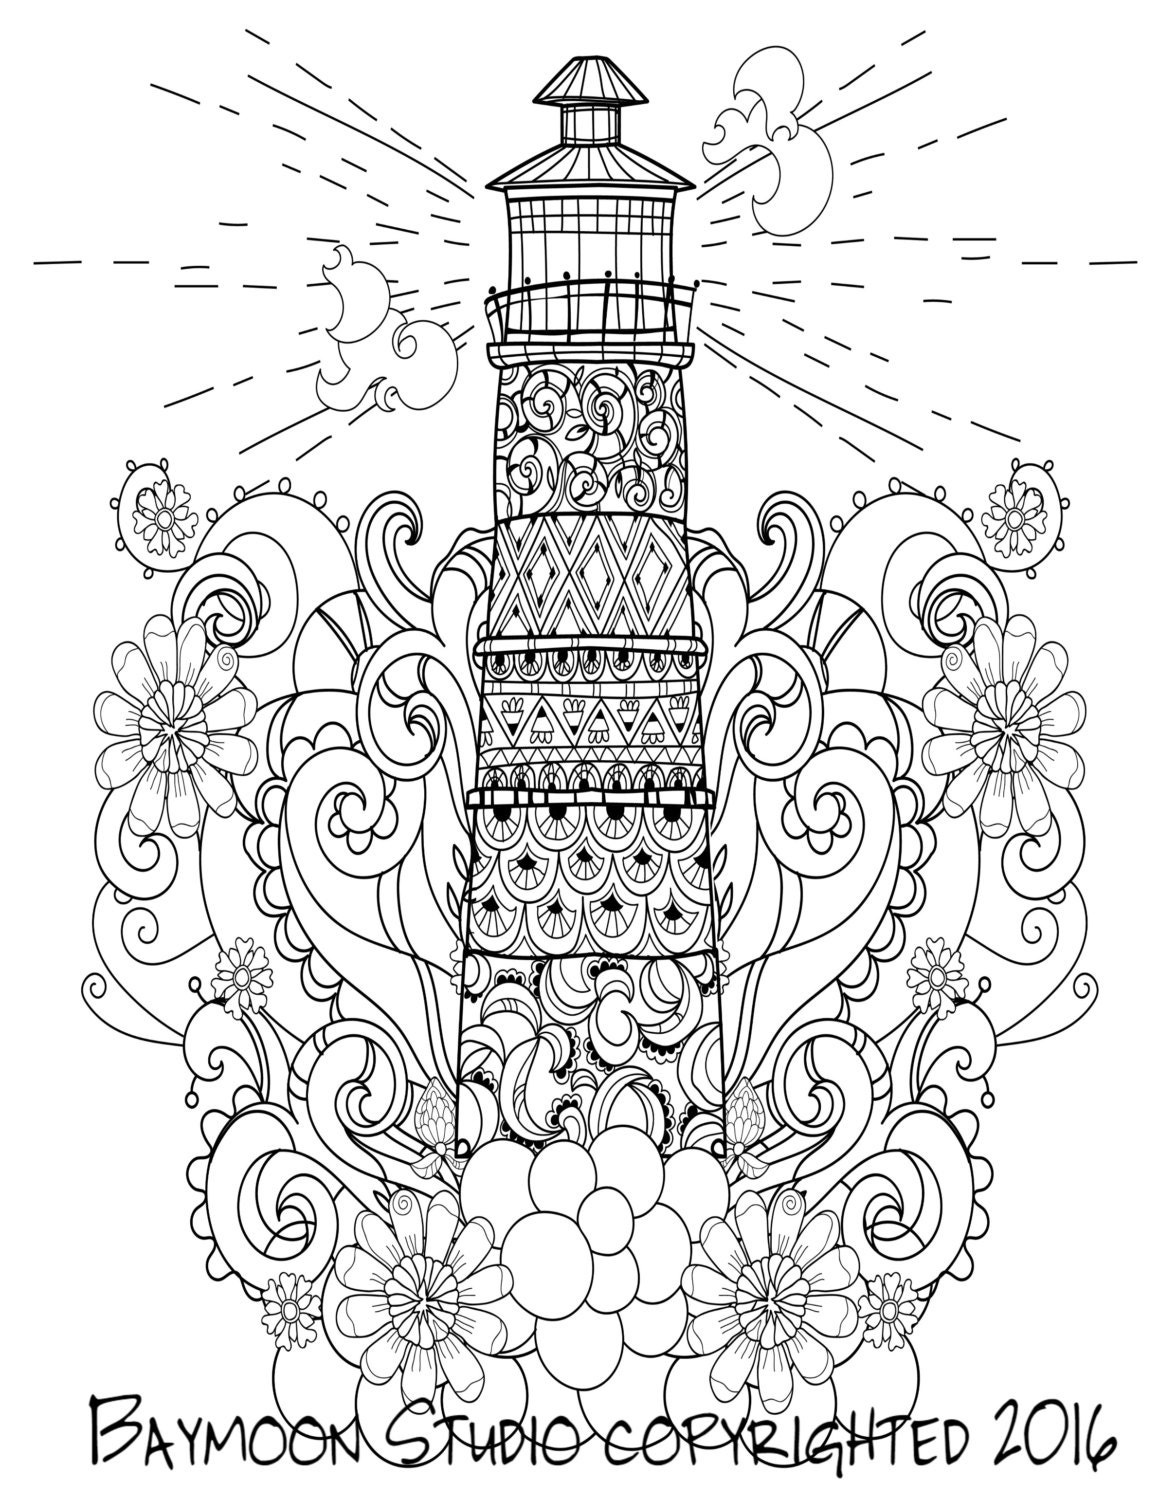 lighthouse-coloring-page-printable-coloring-pages-by-baymoonstudio